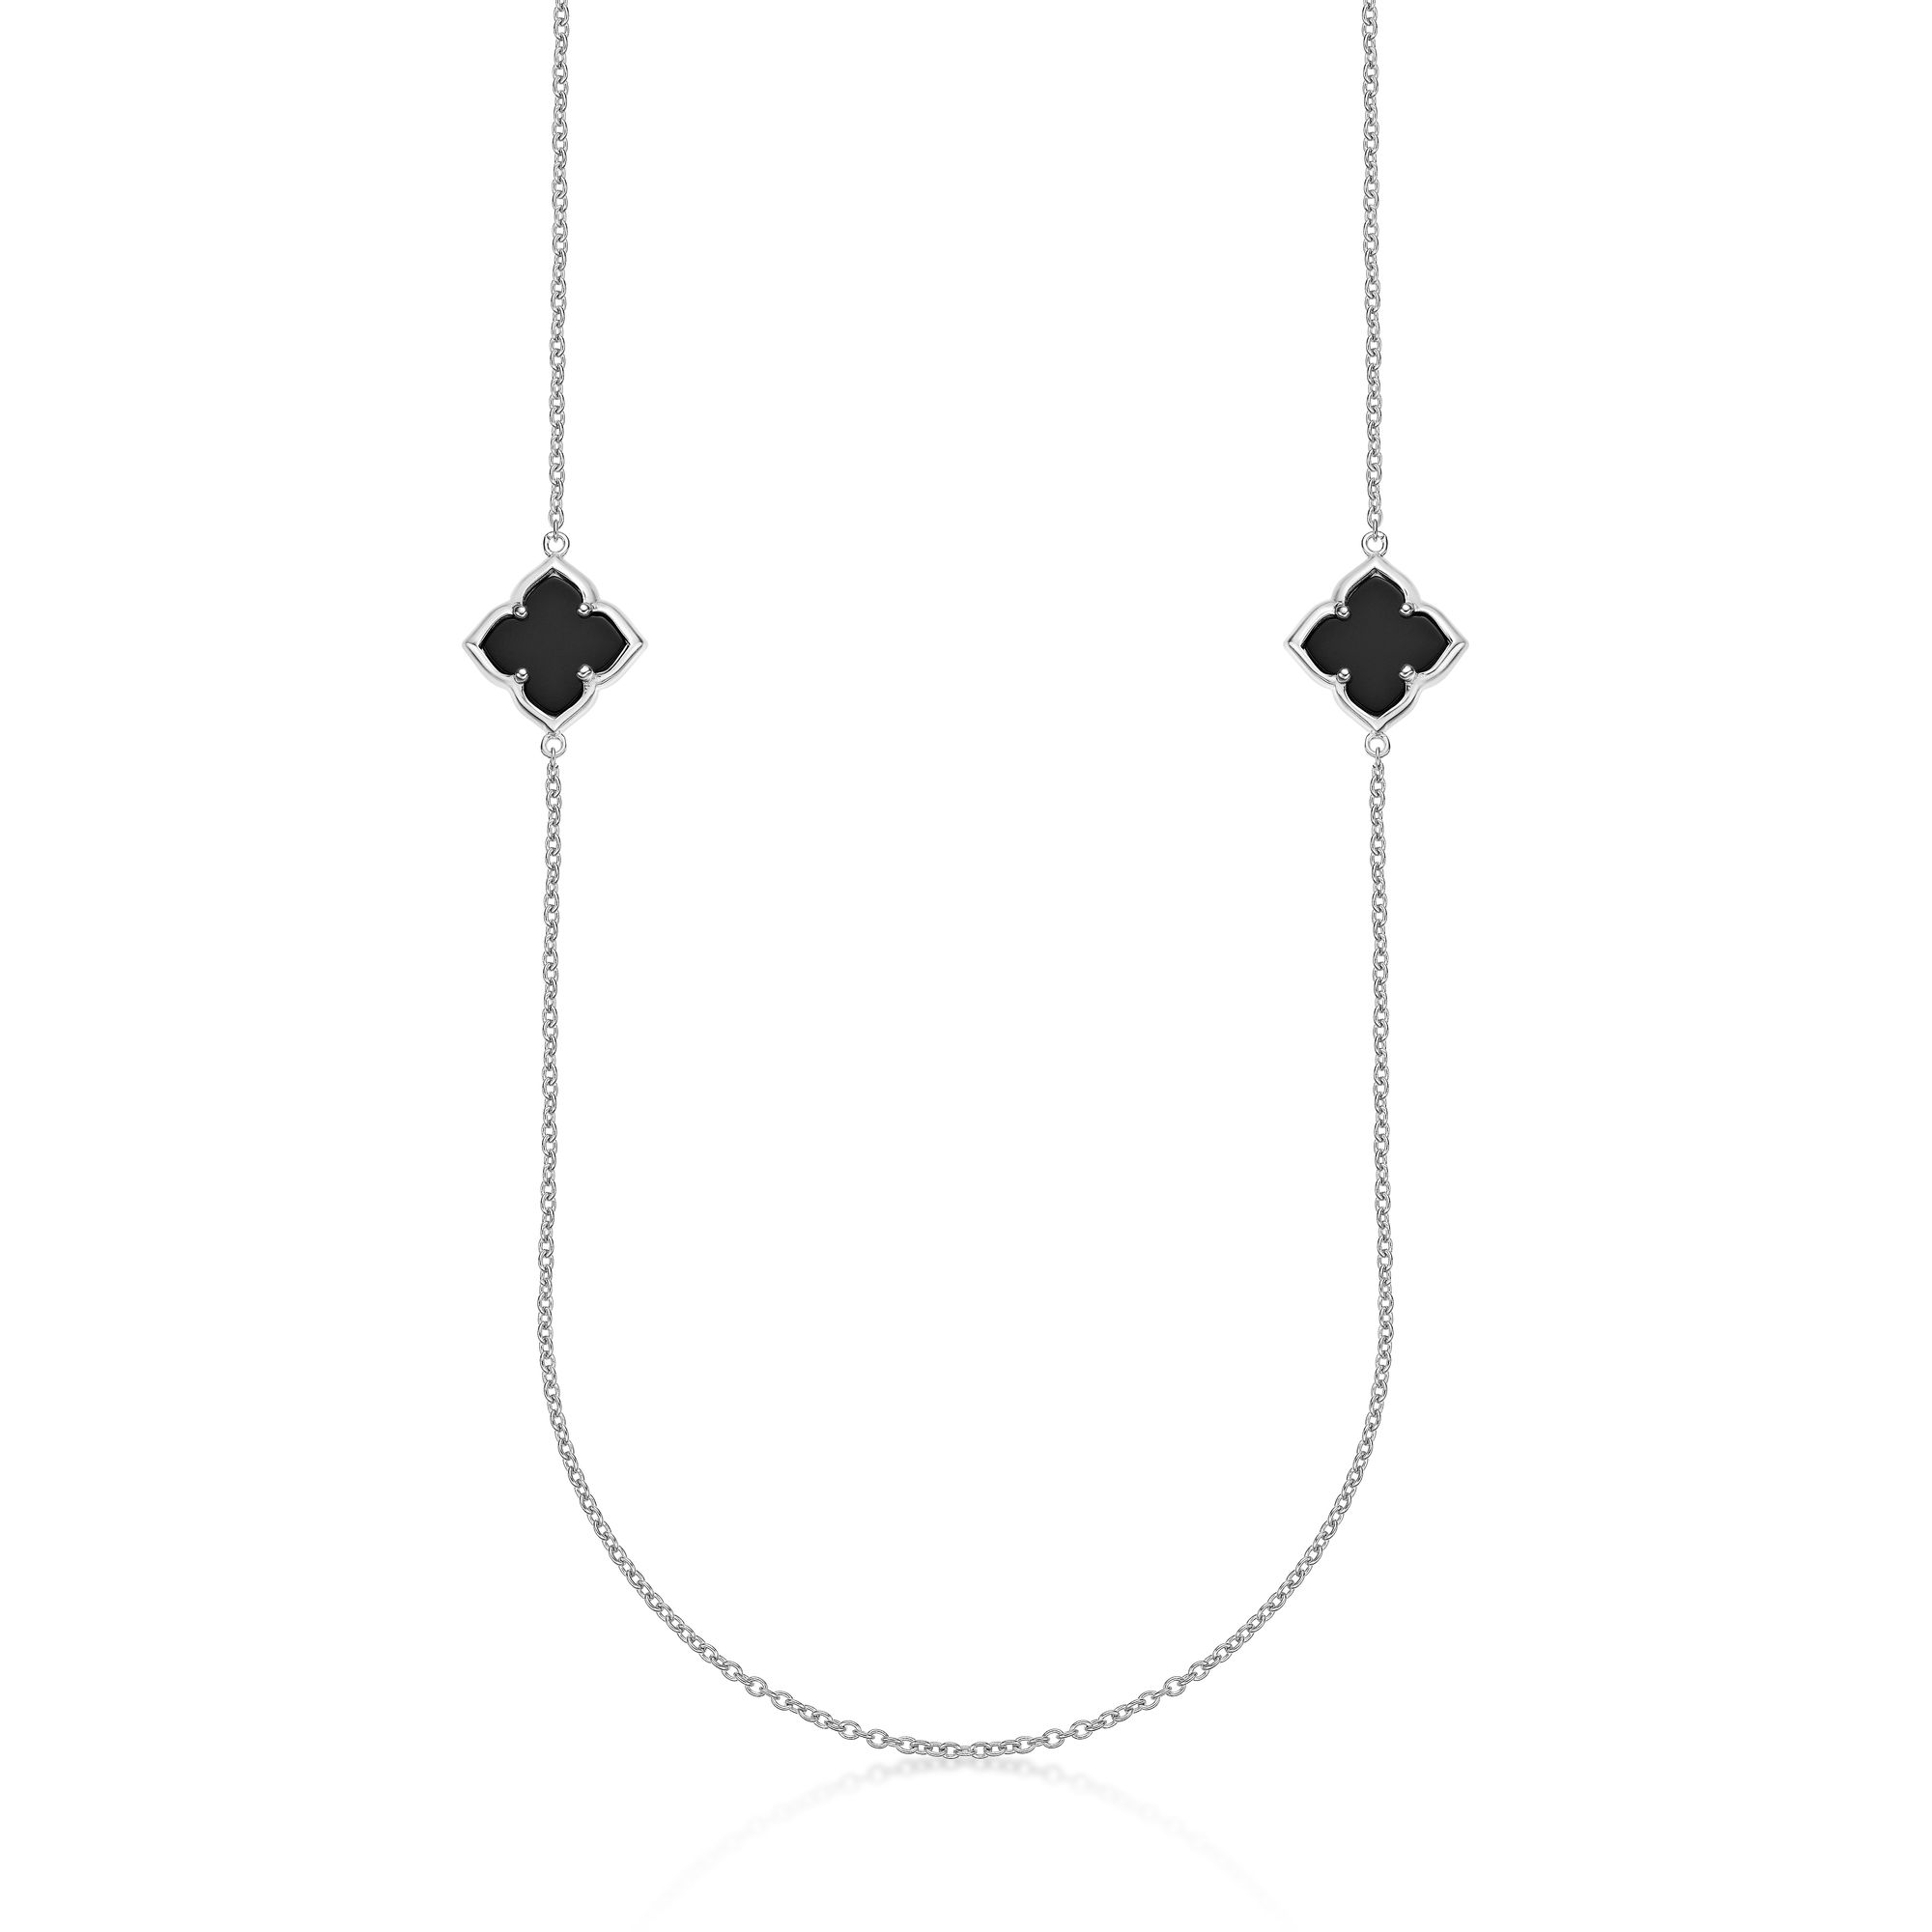 Women's Black Onyx Flower Necklace in 925 Sterling Silver - 32 Inch Adjustable Cable Chain - Flora | Lavari Jewelers